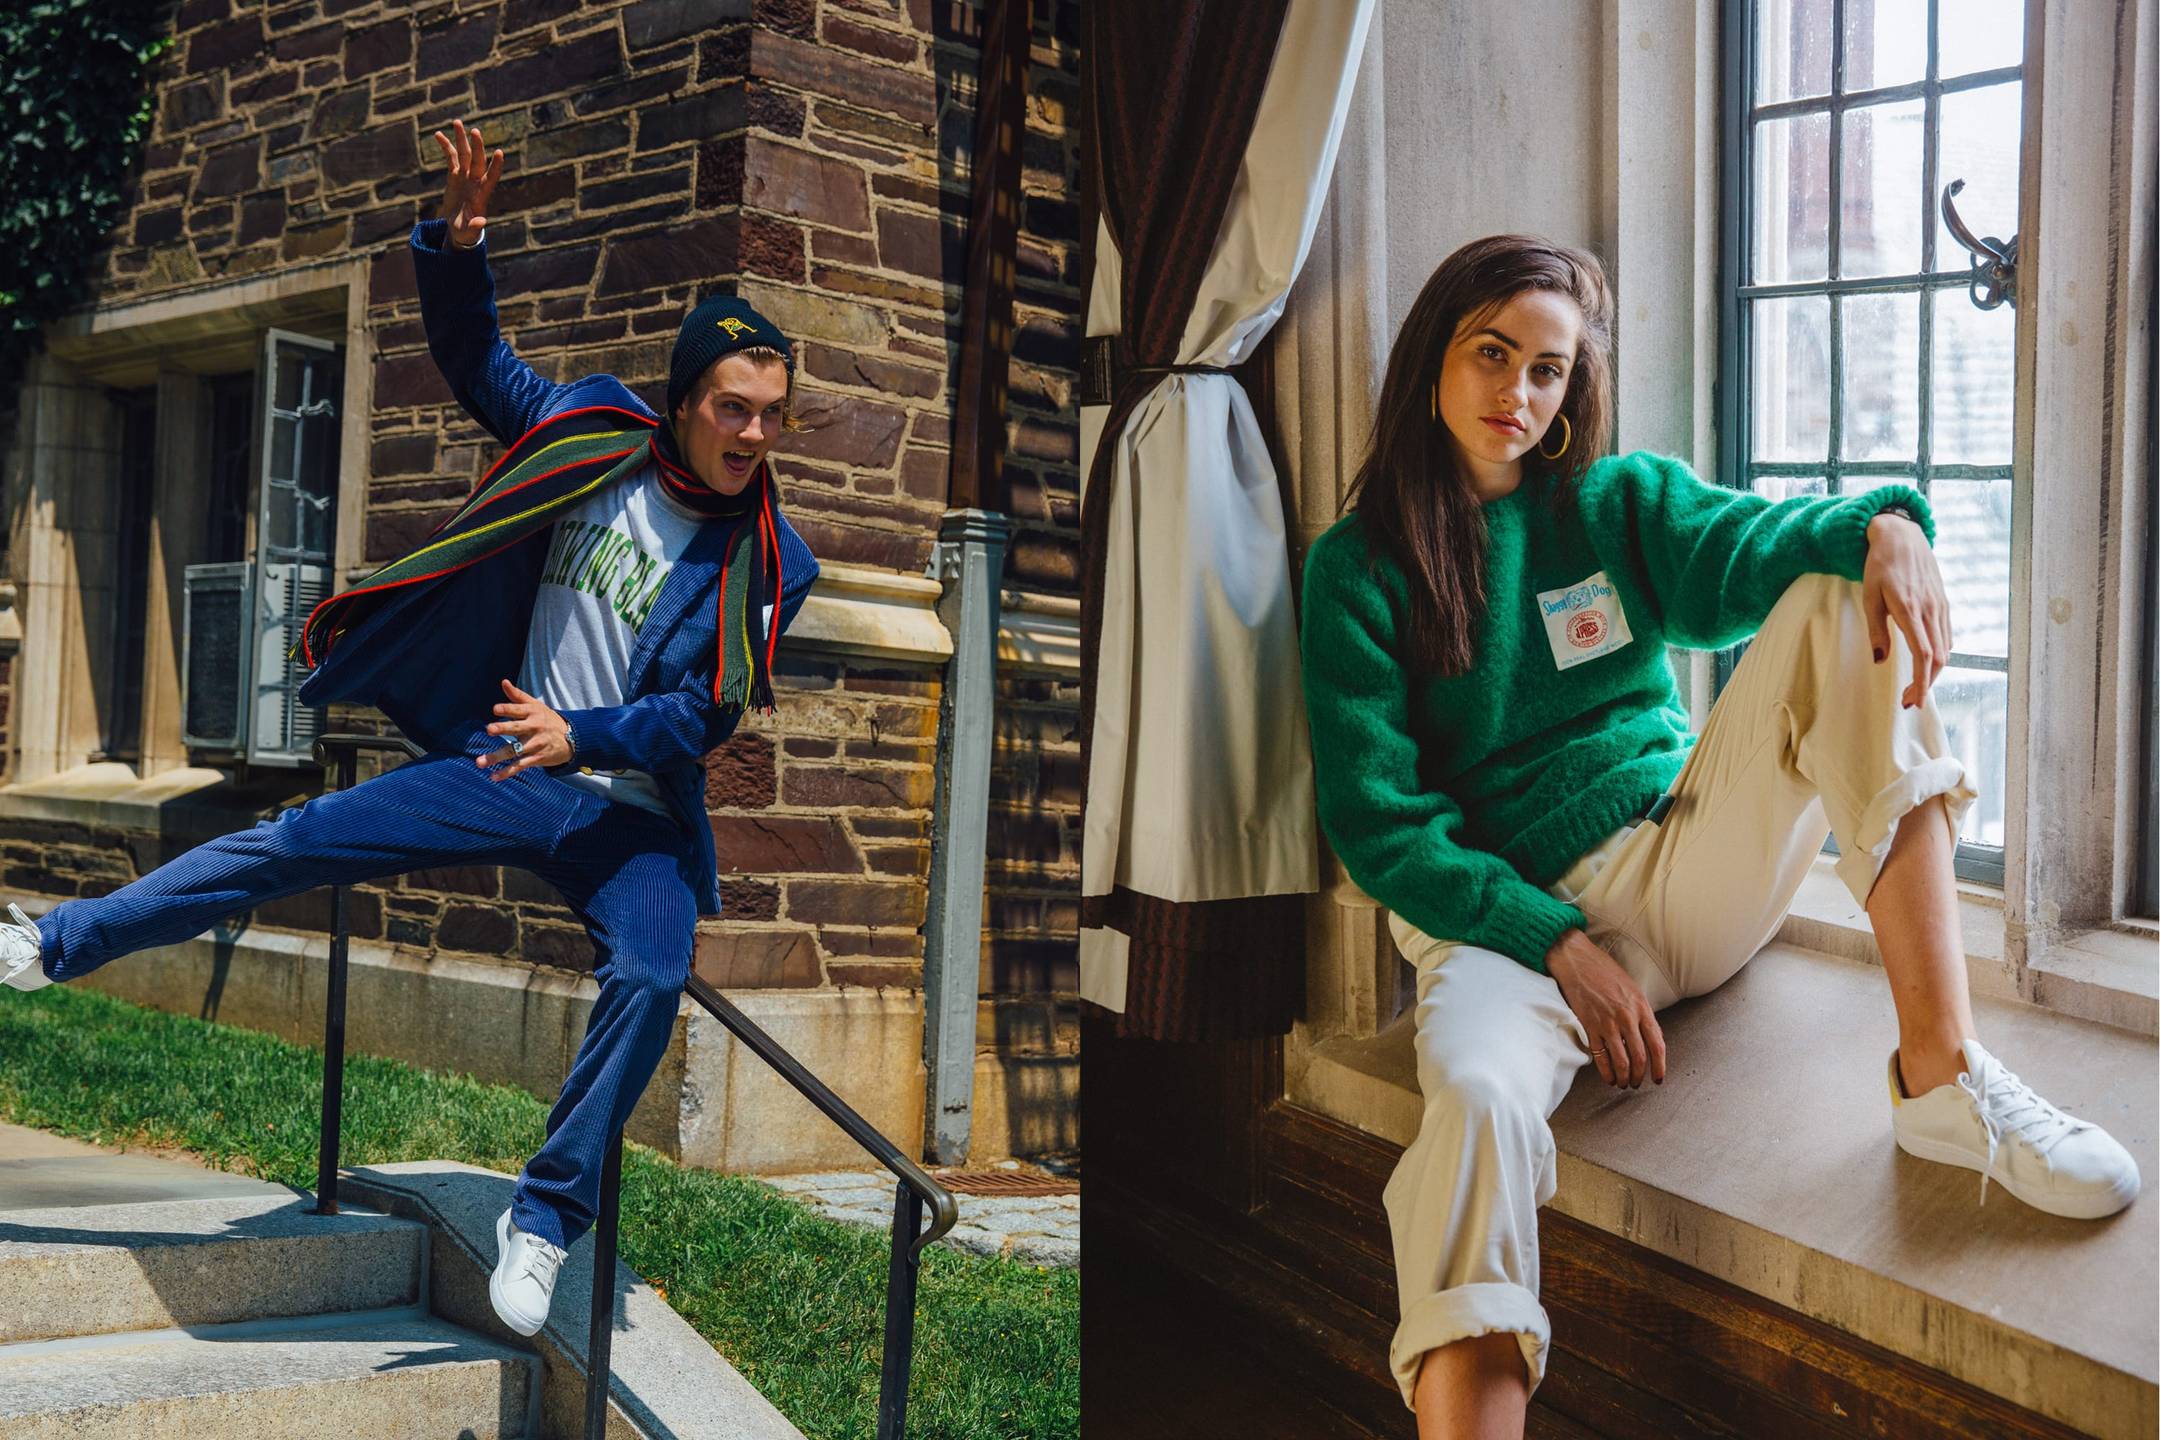 Male model wearing the Rowing Blazers Collegiate Tee in green and the Extra Soft Corduroy Jacket in royal blue. Female model wearing the JPress Shaggy Dog Sweater in green and the Cream Twill Wide Leg Trousers  